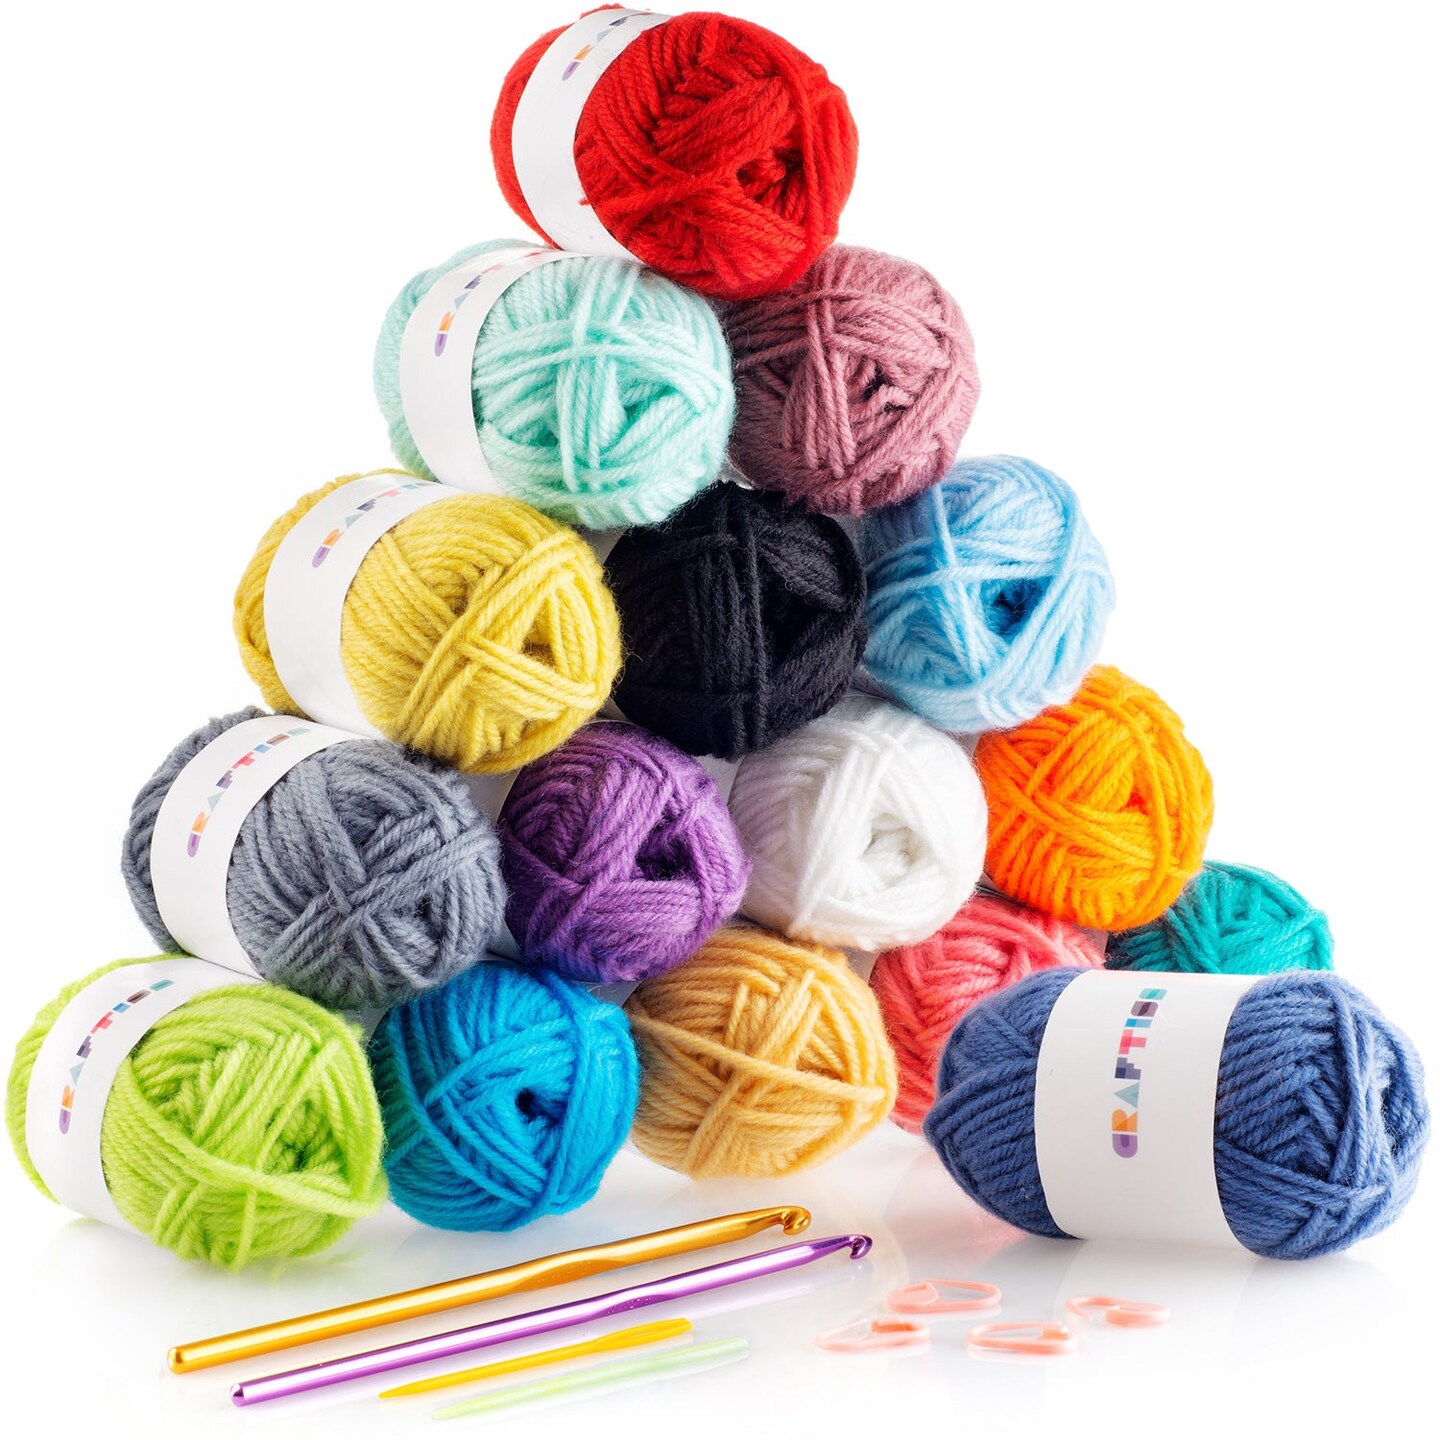 Wholesale cheap wool yarn For Sewing, Knitting, And Crafting 